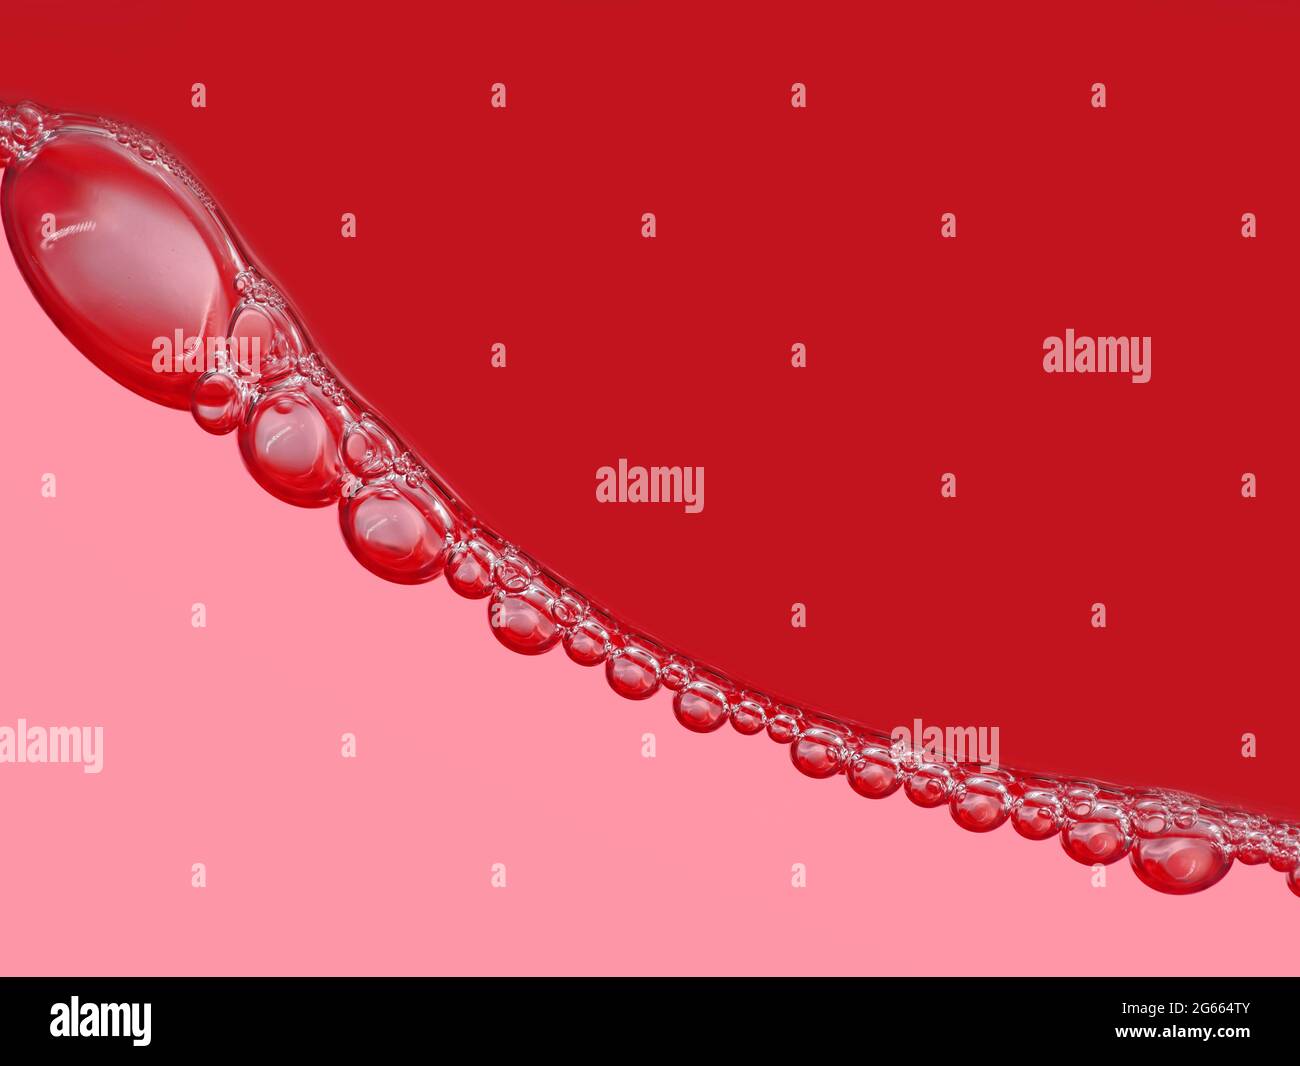 bubble chain on surface in red soft drink, close up, abstract red background of bubbles Stock Photo